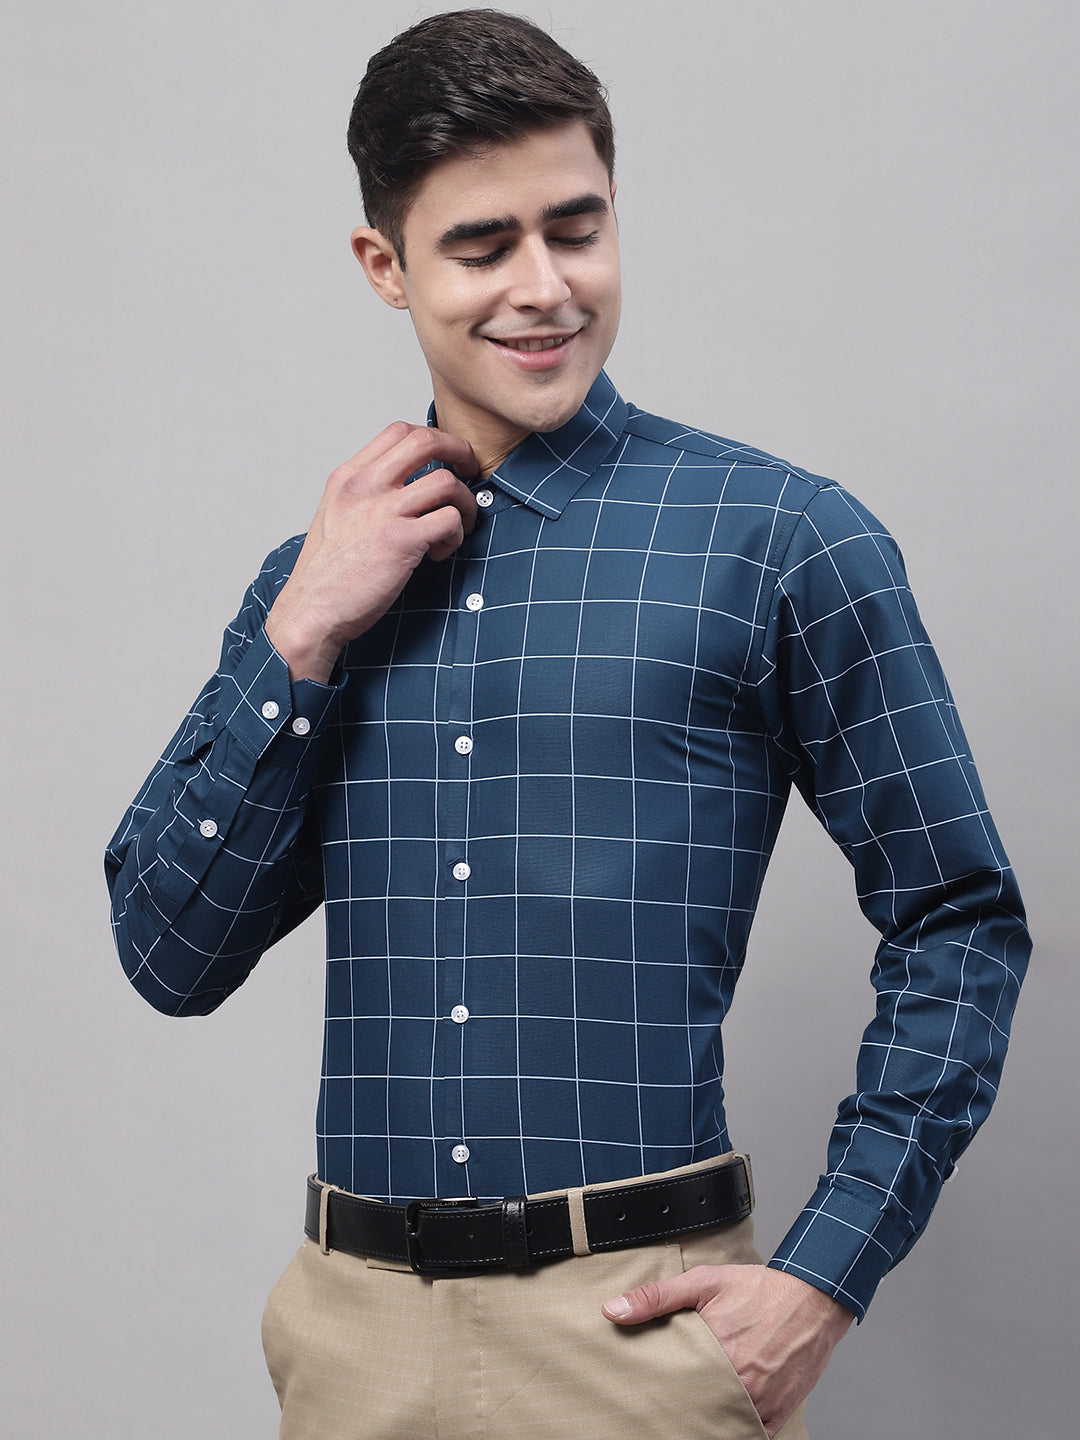 Men's Teal Blue Cotton Checked Formal Shirt